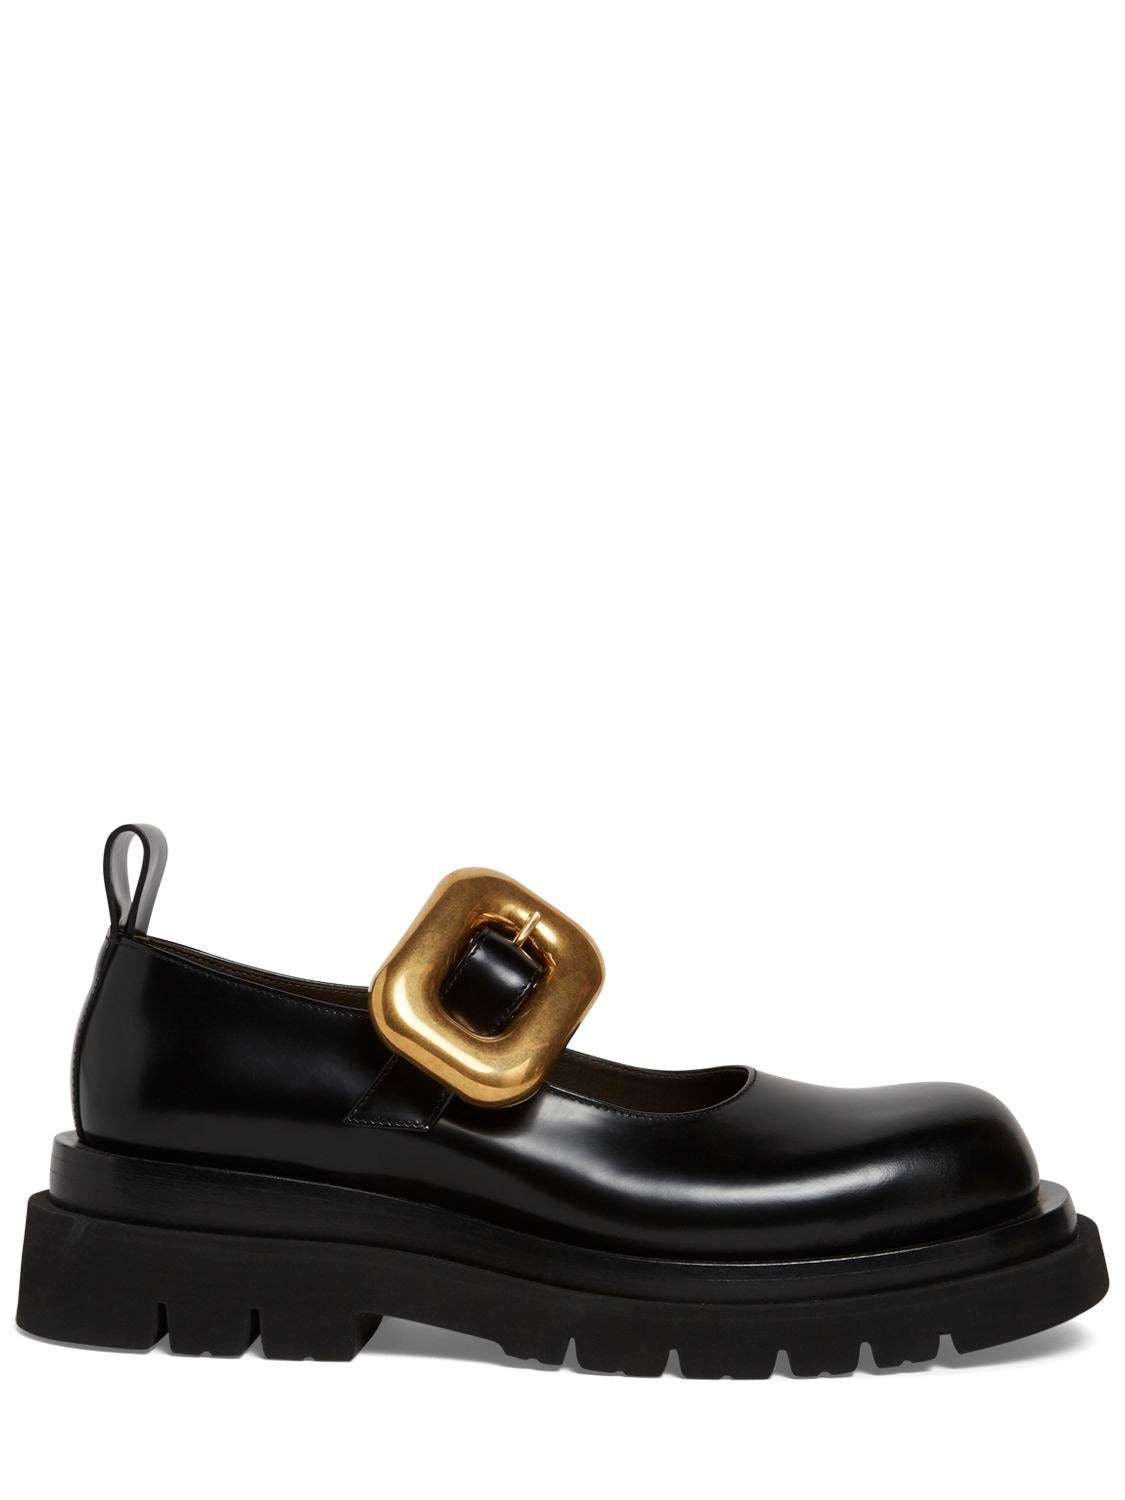 Image of 30mm Lug Leather Loafers